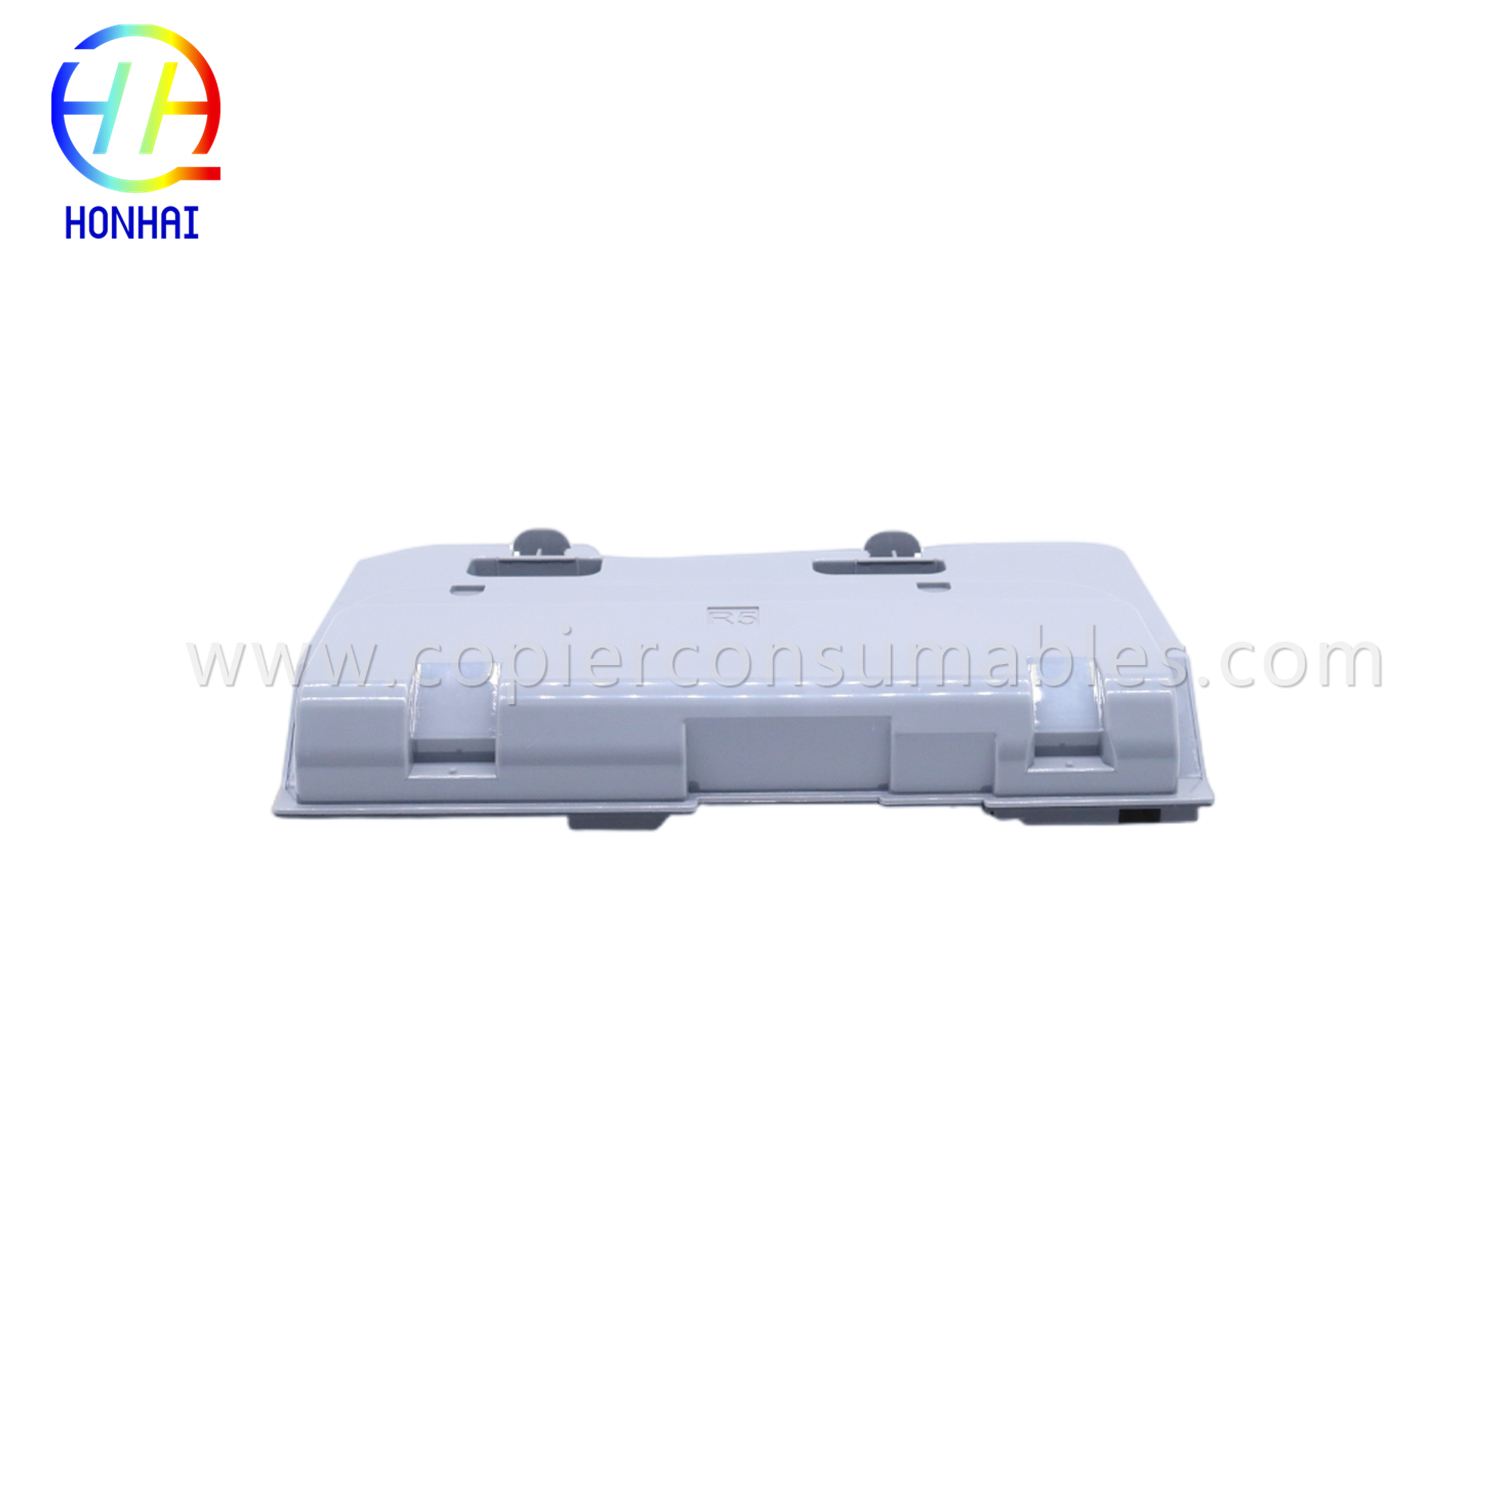 Factory directly supply Mugwort Toner - Waste Toner Container for Xerox Docucentre IV C2260 C2263 C2265 (CWAA0777) OEM – HONHAI